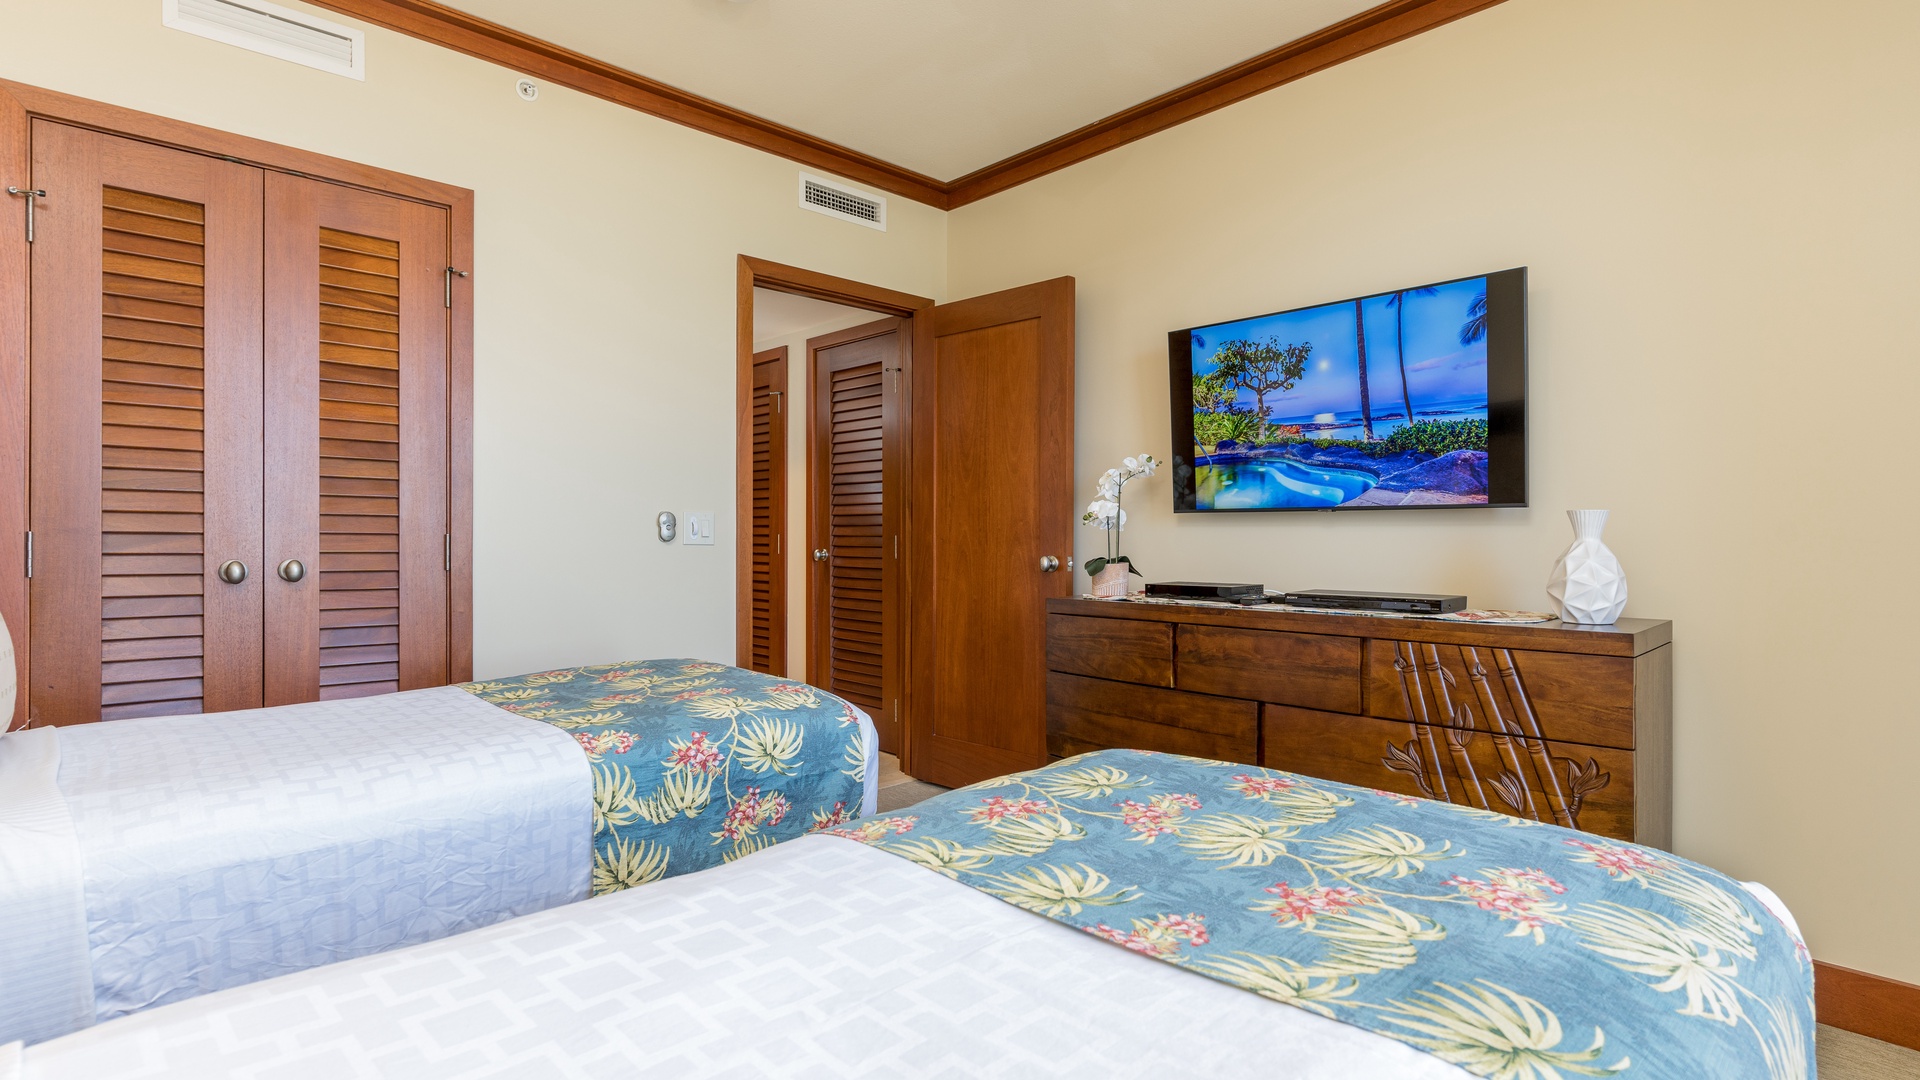 Kapolei Vacation Rentals, Ko Olina Beach Villas B309 - The second guest bedroom with a TV and bright designs.